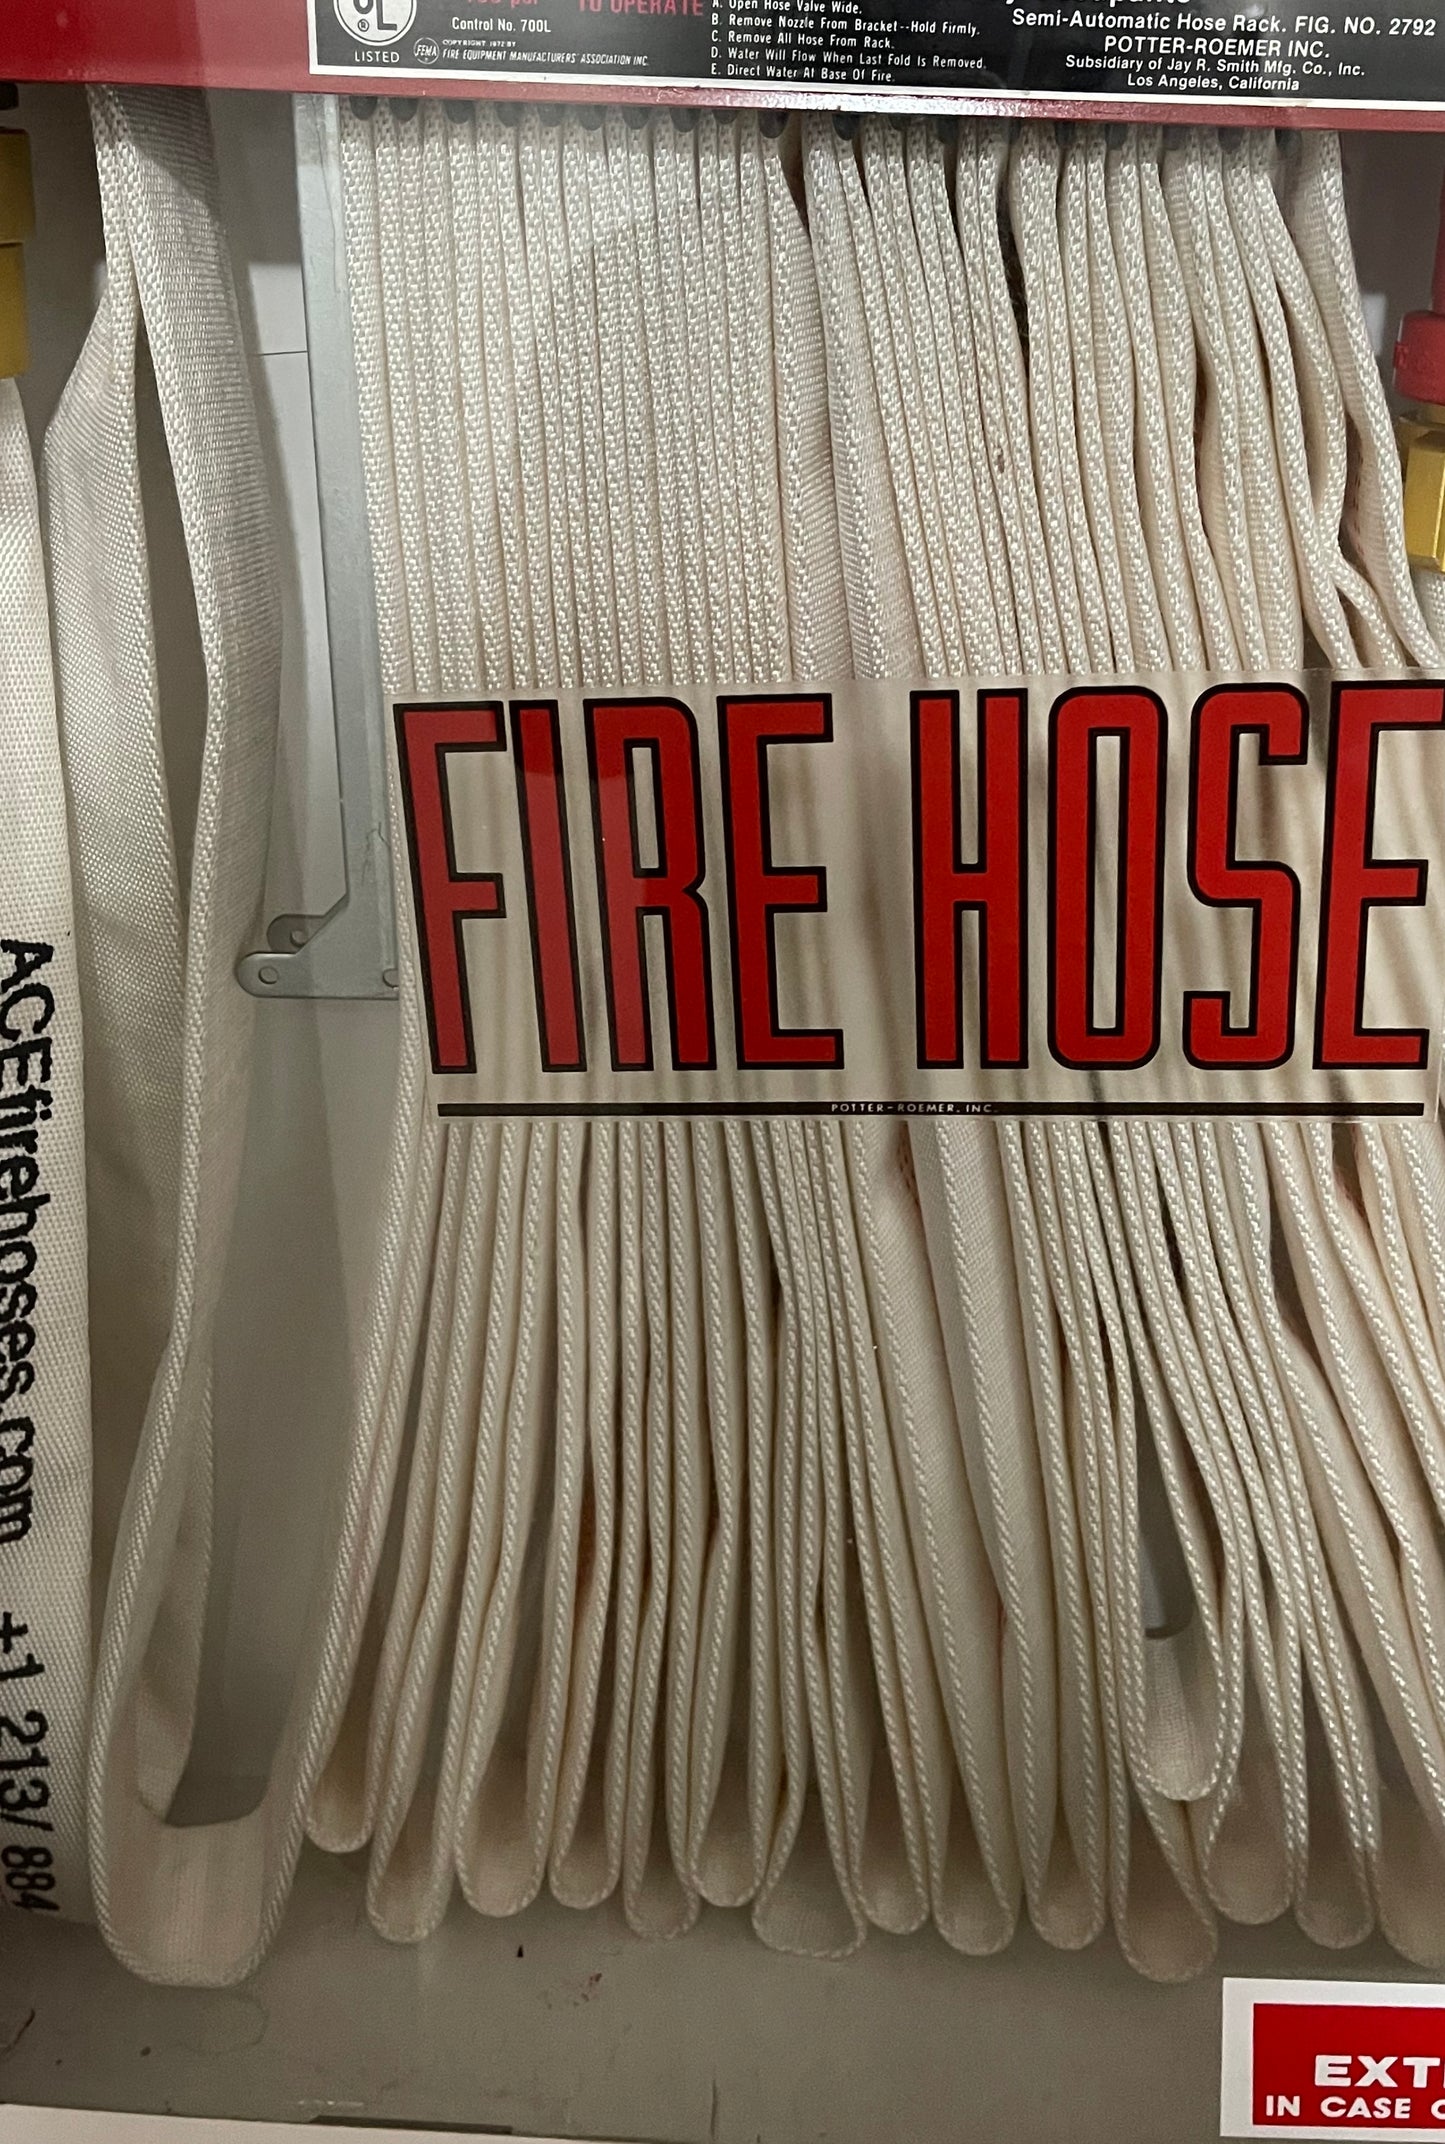 Outstanding Quality Fire Hose Home Building Fire Defense 75’ x 1.5”  (2 pack), Folded, NH Aluminum Couplings, TPU Lining, FM Approved for occupant use.